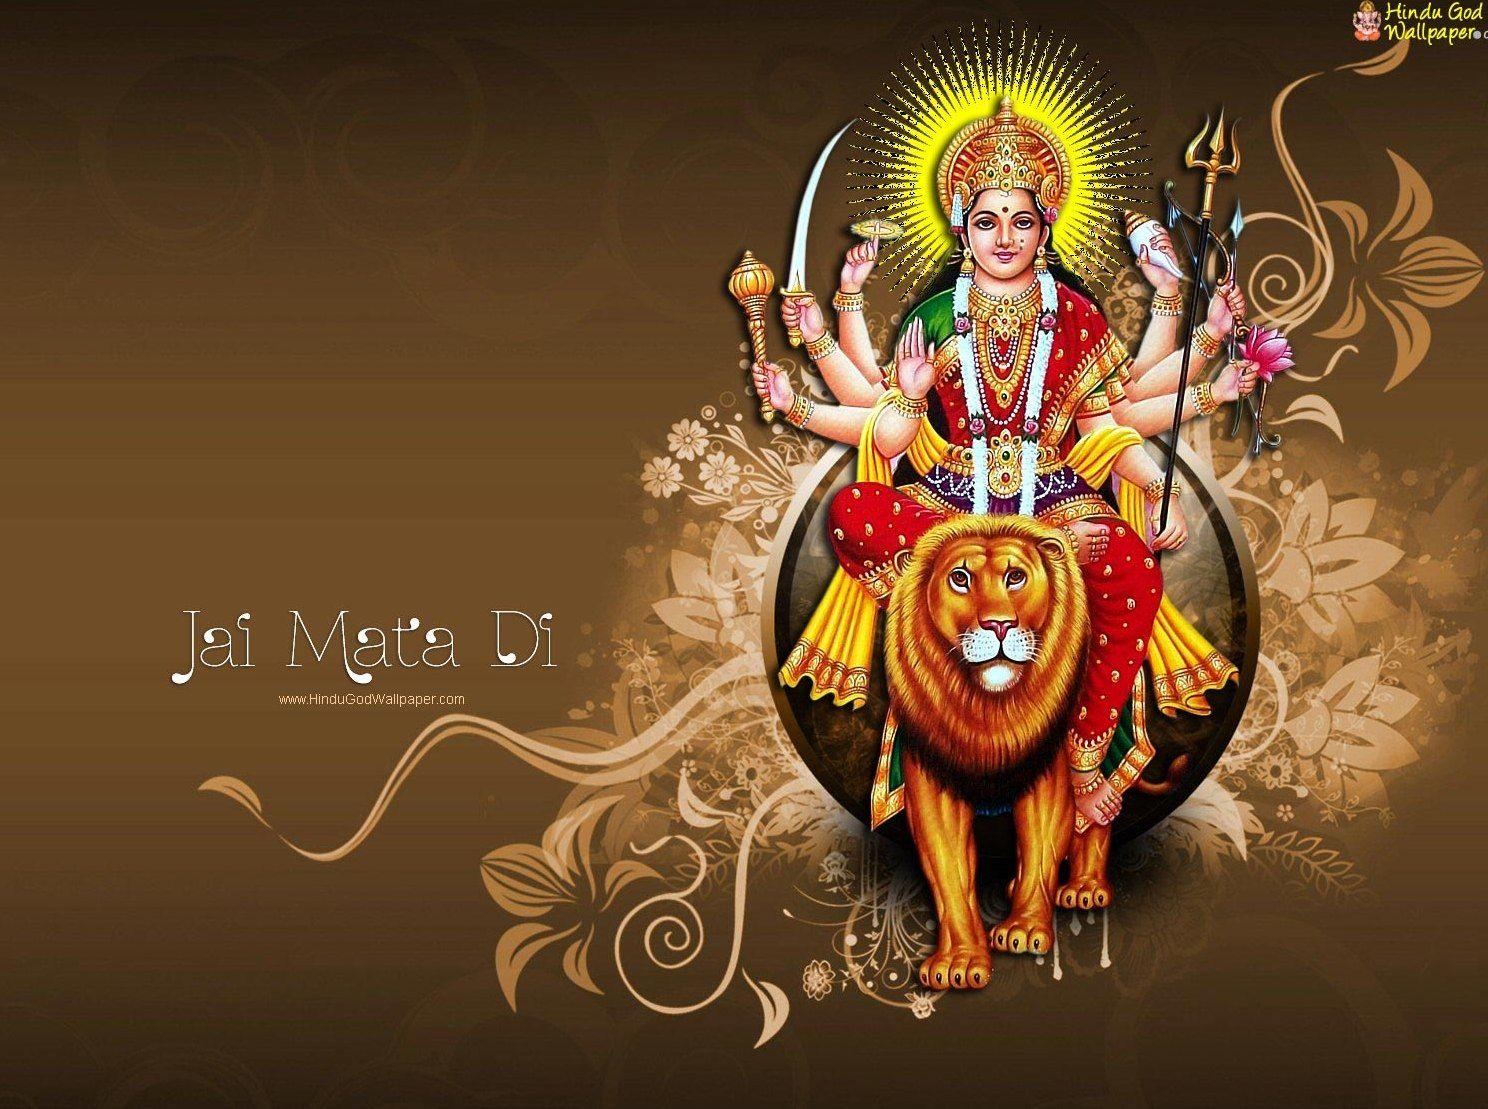 Download latest Maa Durga 4k desktop, image, picture, desktop, and background are ready for you in a. Navratri wallpaper, Maa wallpaper, Maa durga HD wallpaper